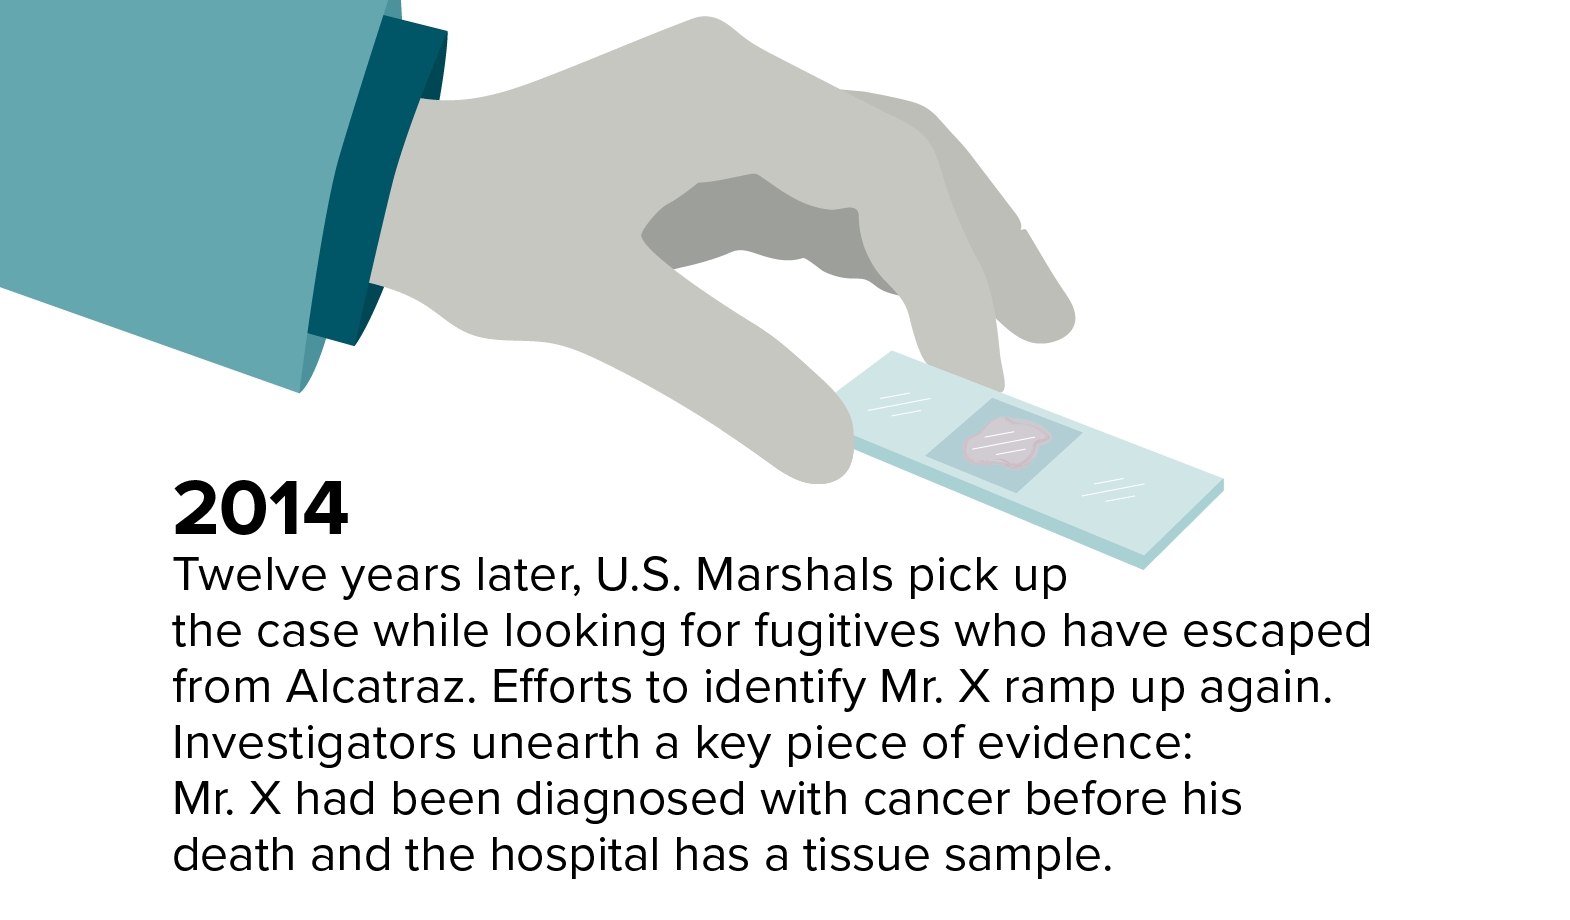 2014: Twelve years later, U.S. Marshals pick up the case while looking for fugitives who have escaped from Alcatraz. Efforts to identify Mr. X ramp up again. Investigators unearth a key piece of evidence: Mr. X had been diagnosed with cancer before his death and the hospital has a tissue sample.